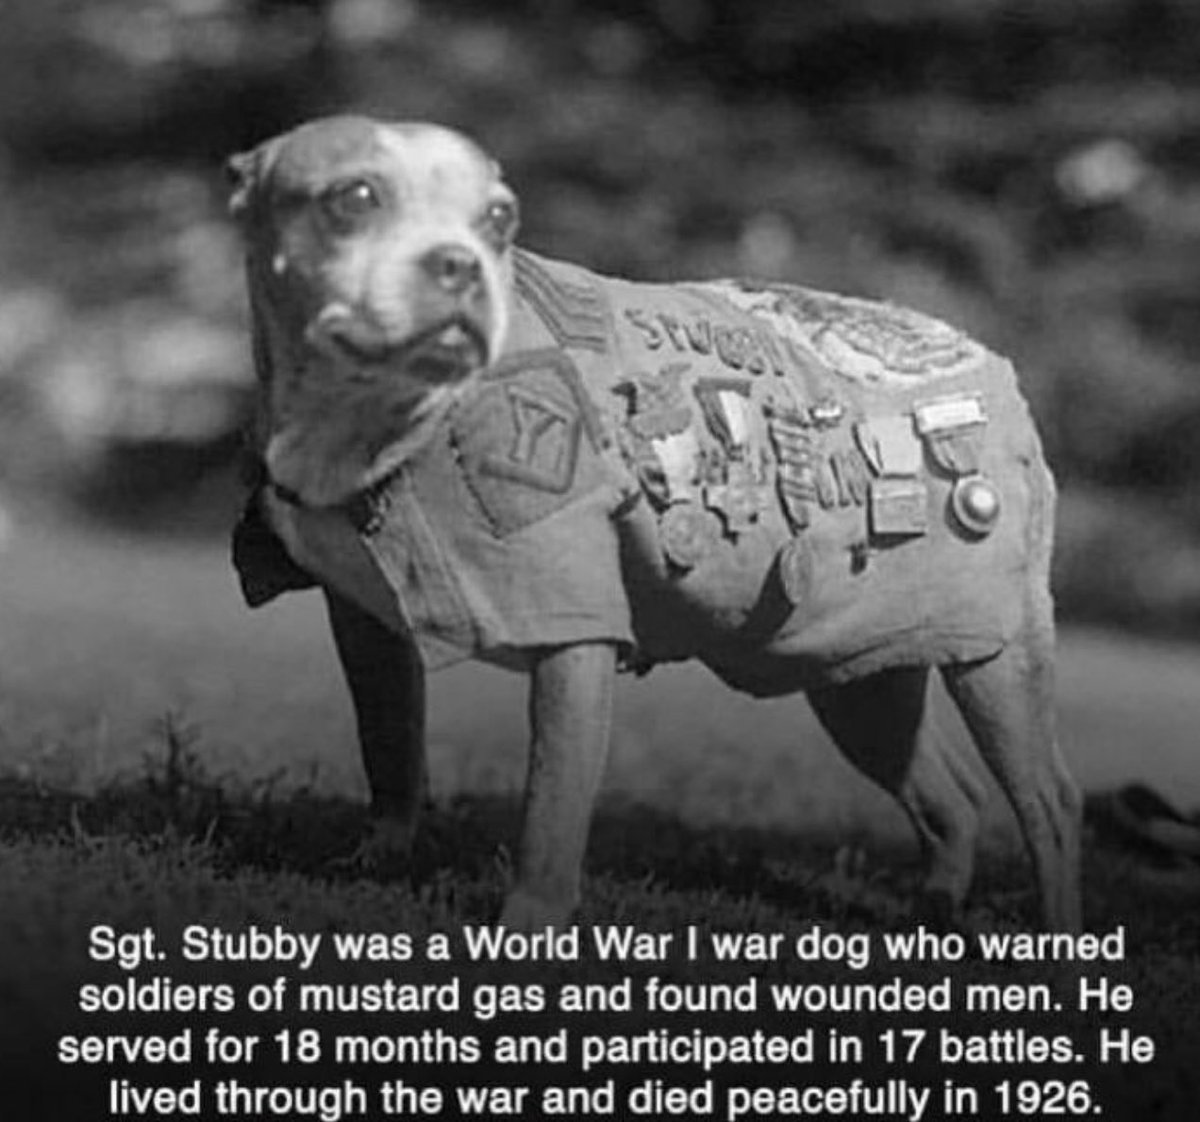 Sgt. Stubby will forever live on in our hearts.